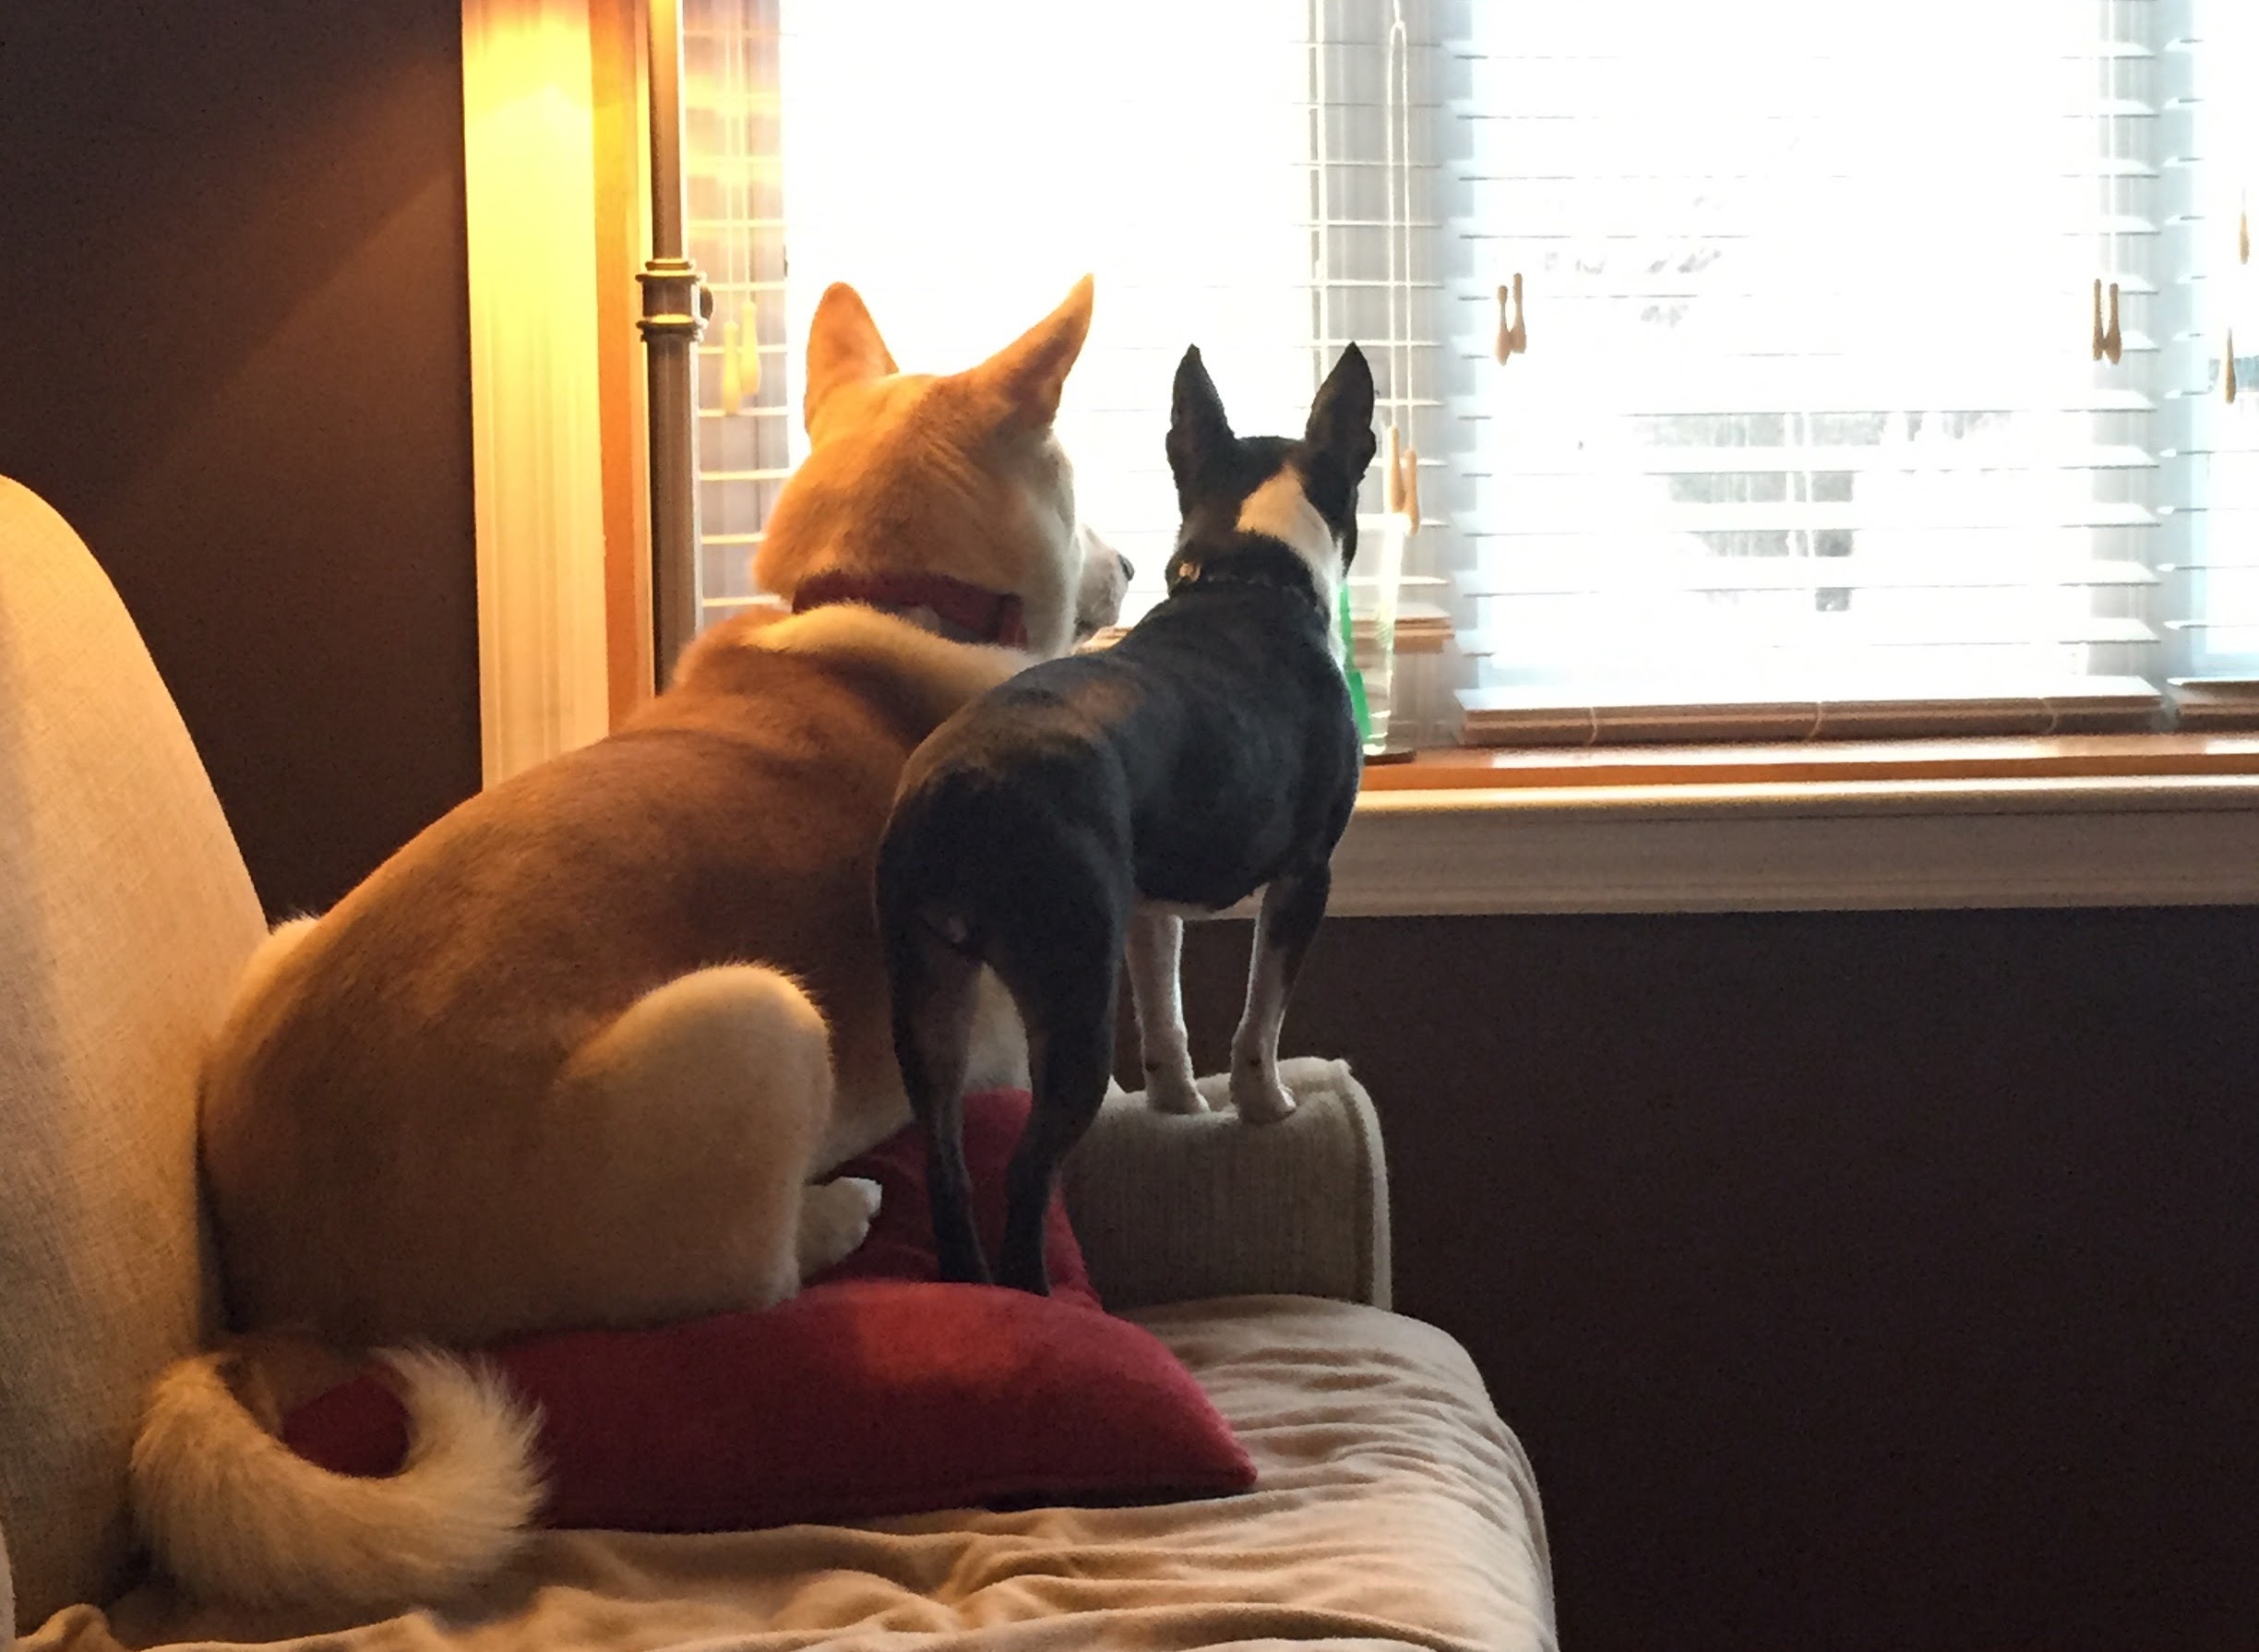 Dogs on couch looking out window